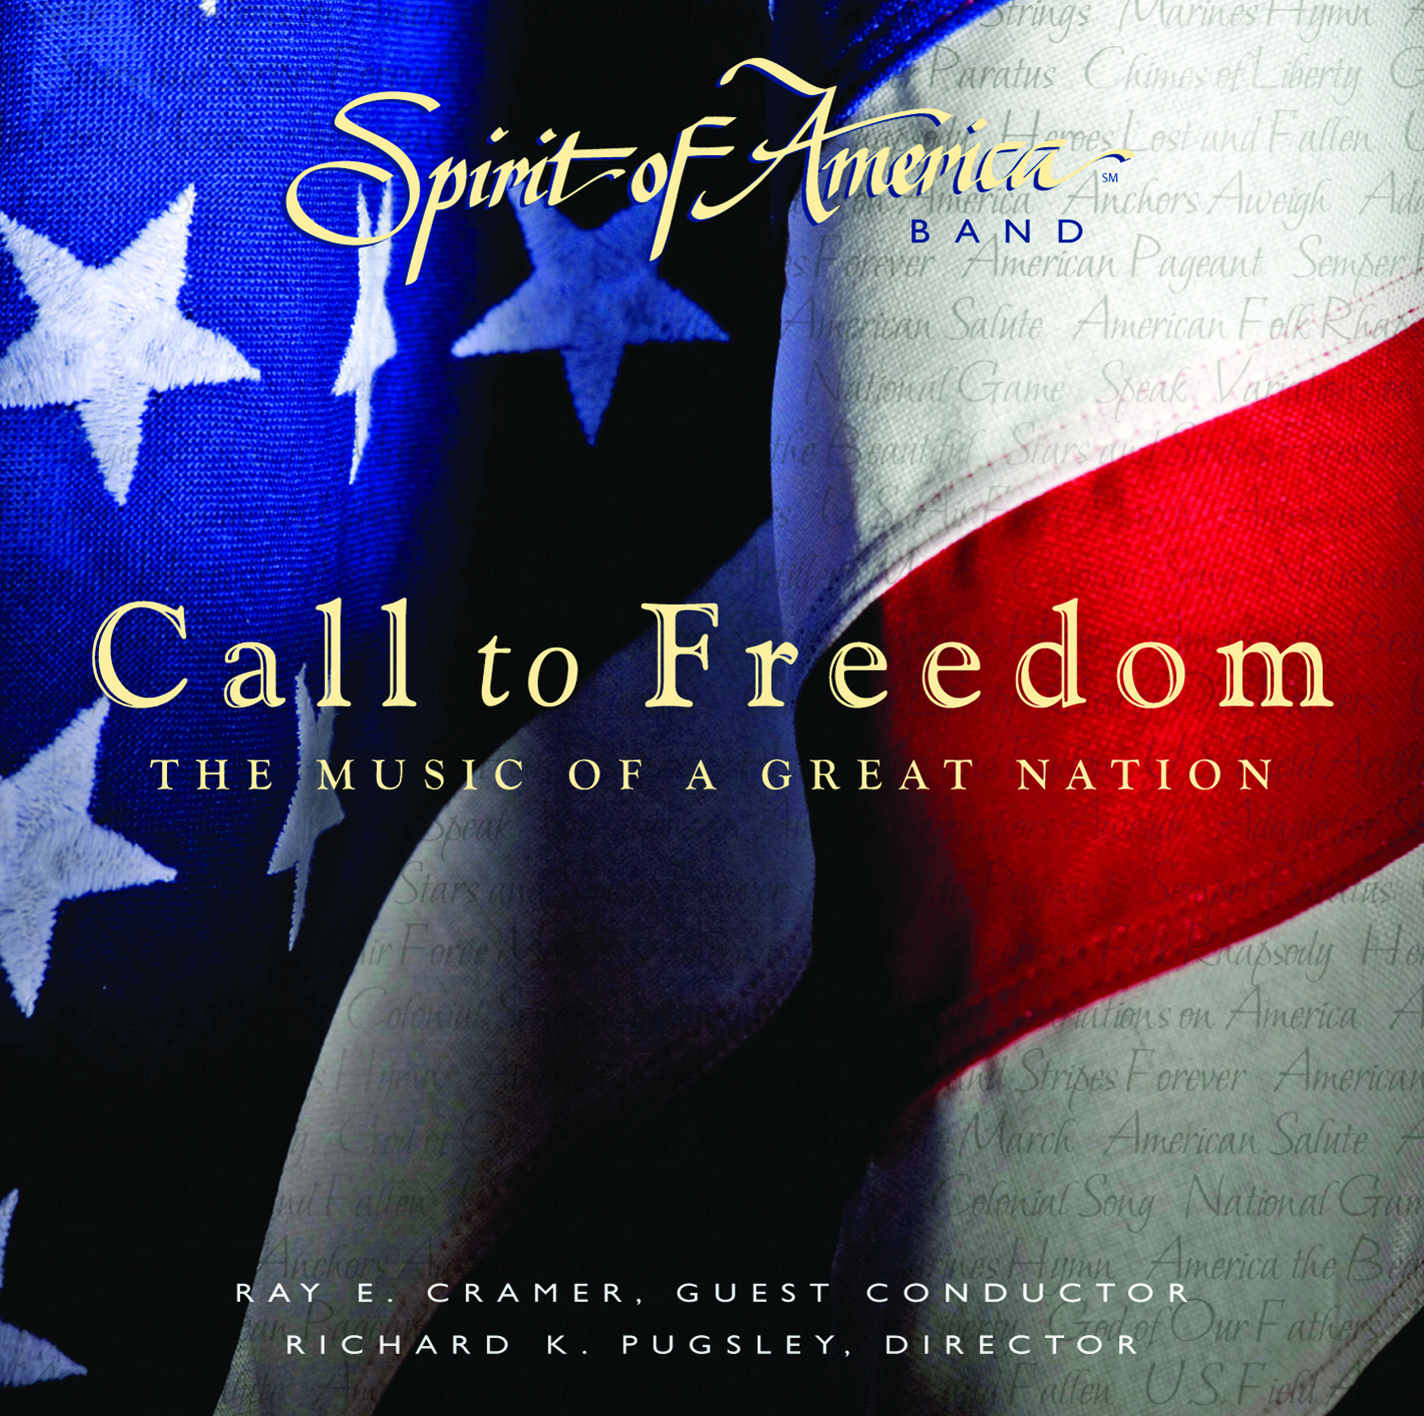 product image of 'Call to Freedom' Spirit of America Band recording